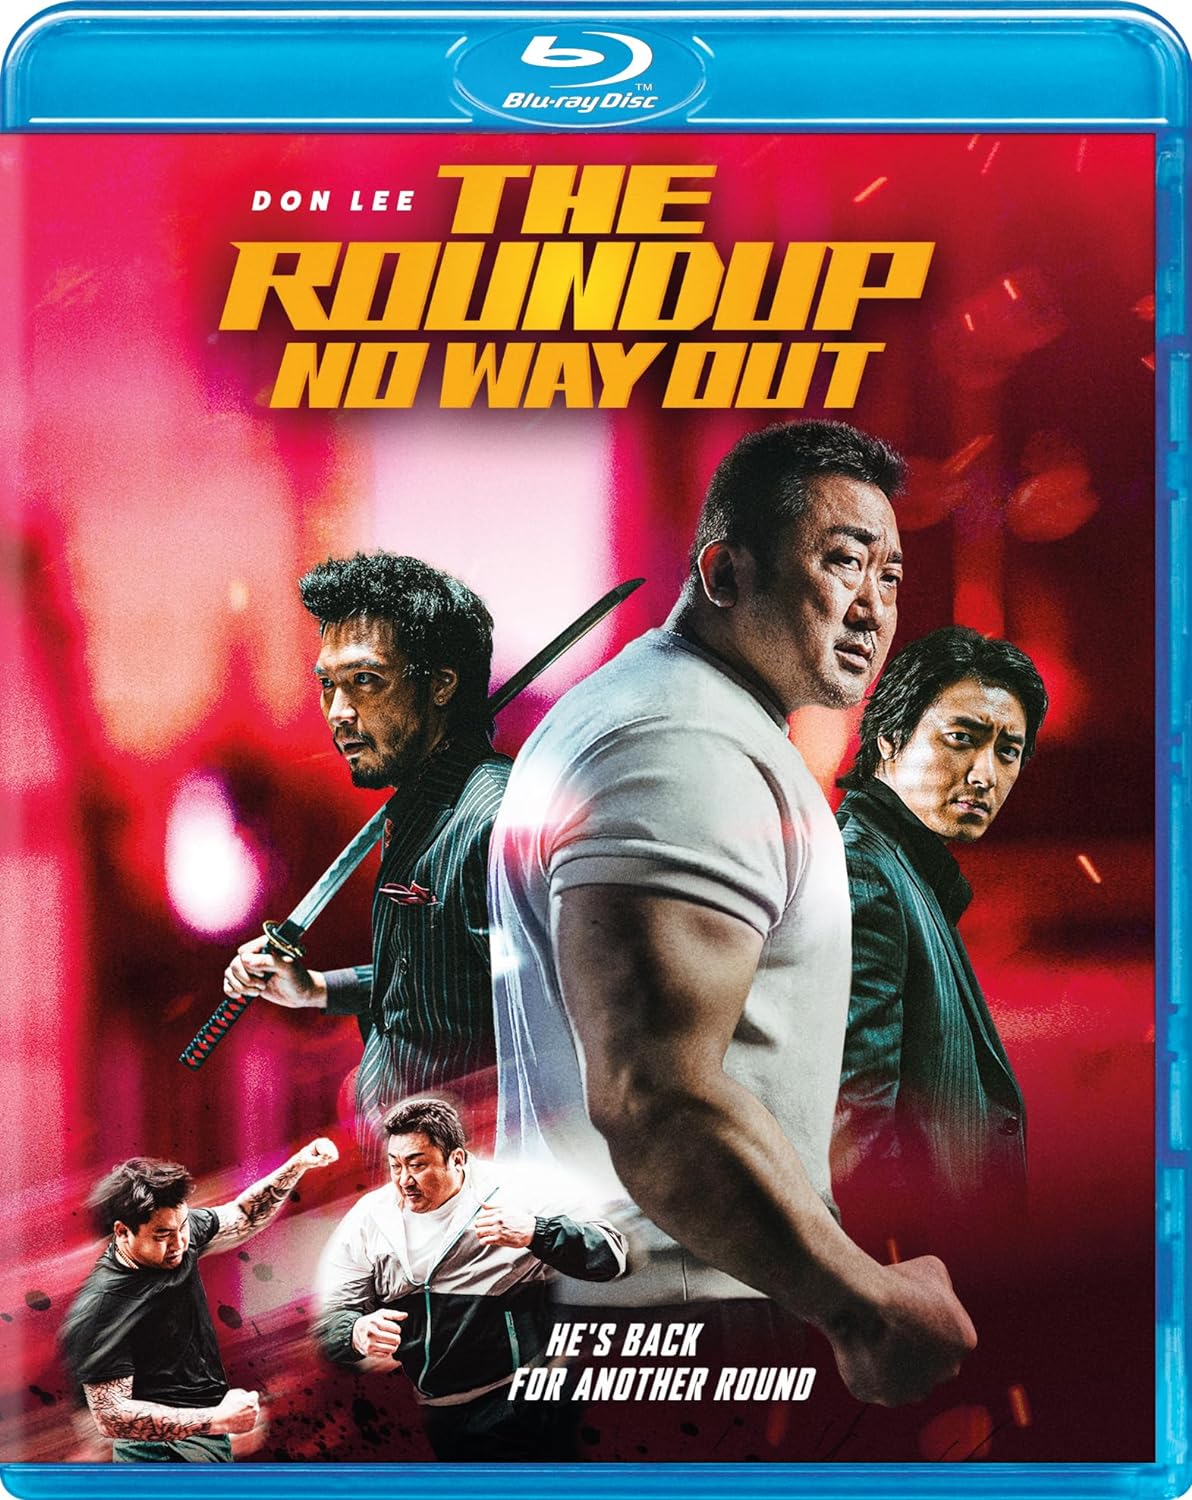 THE ROUNDUP: NO WAY OUT BLU-RAY